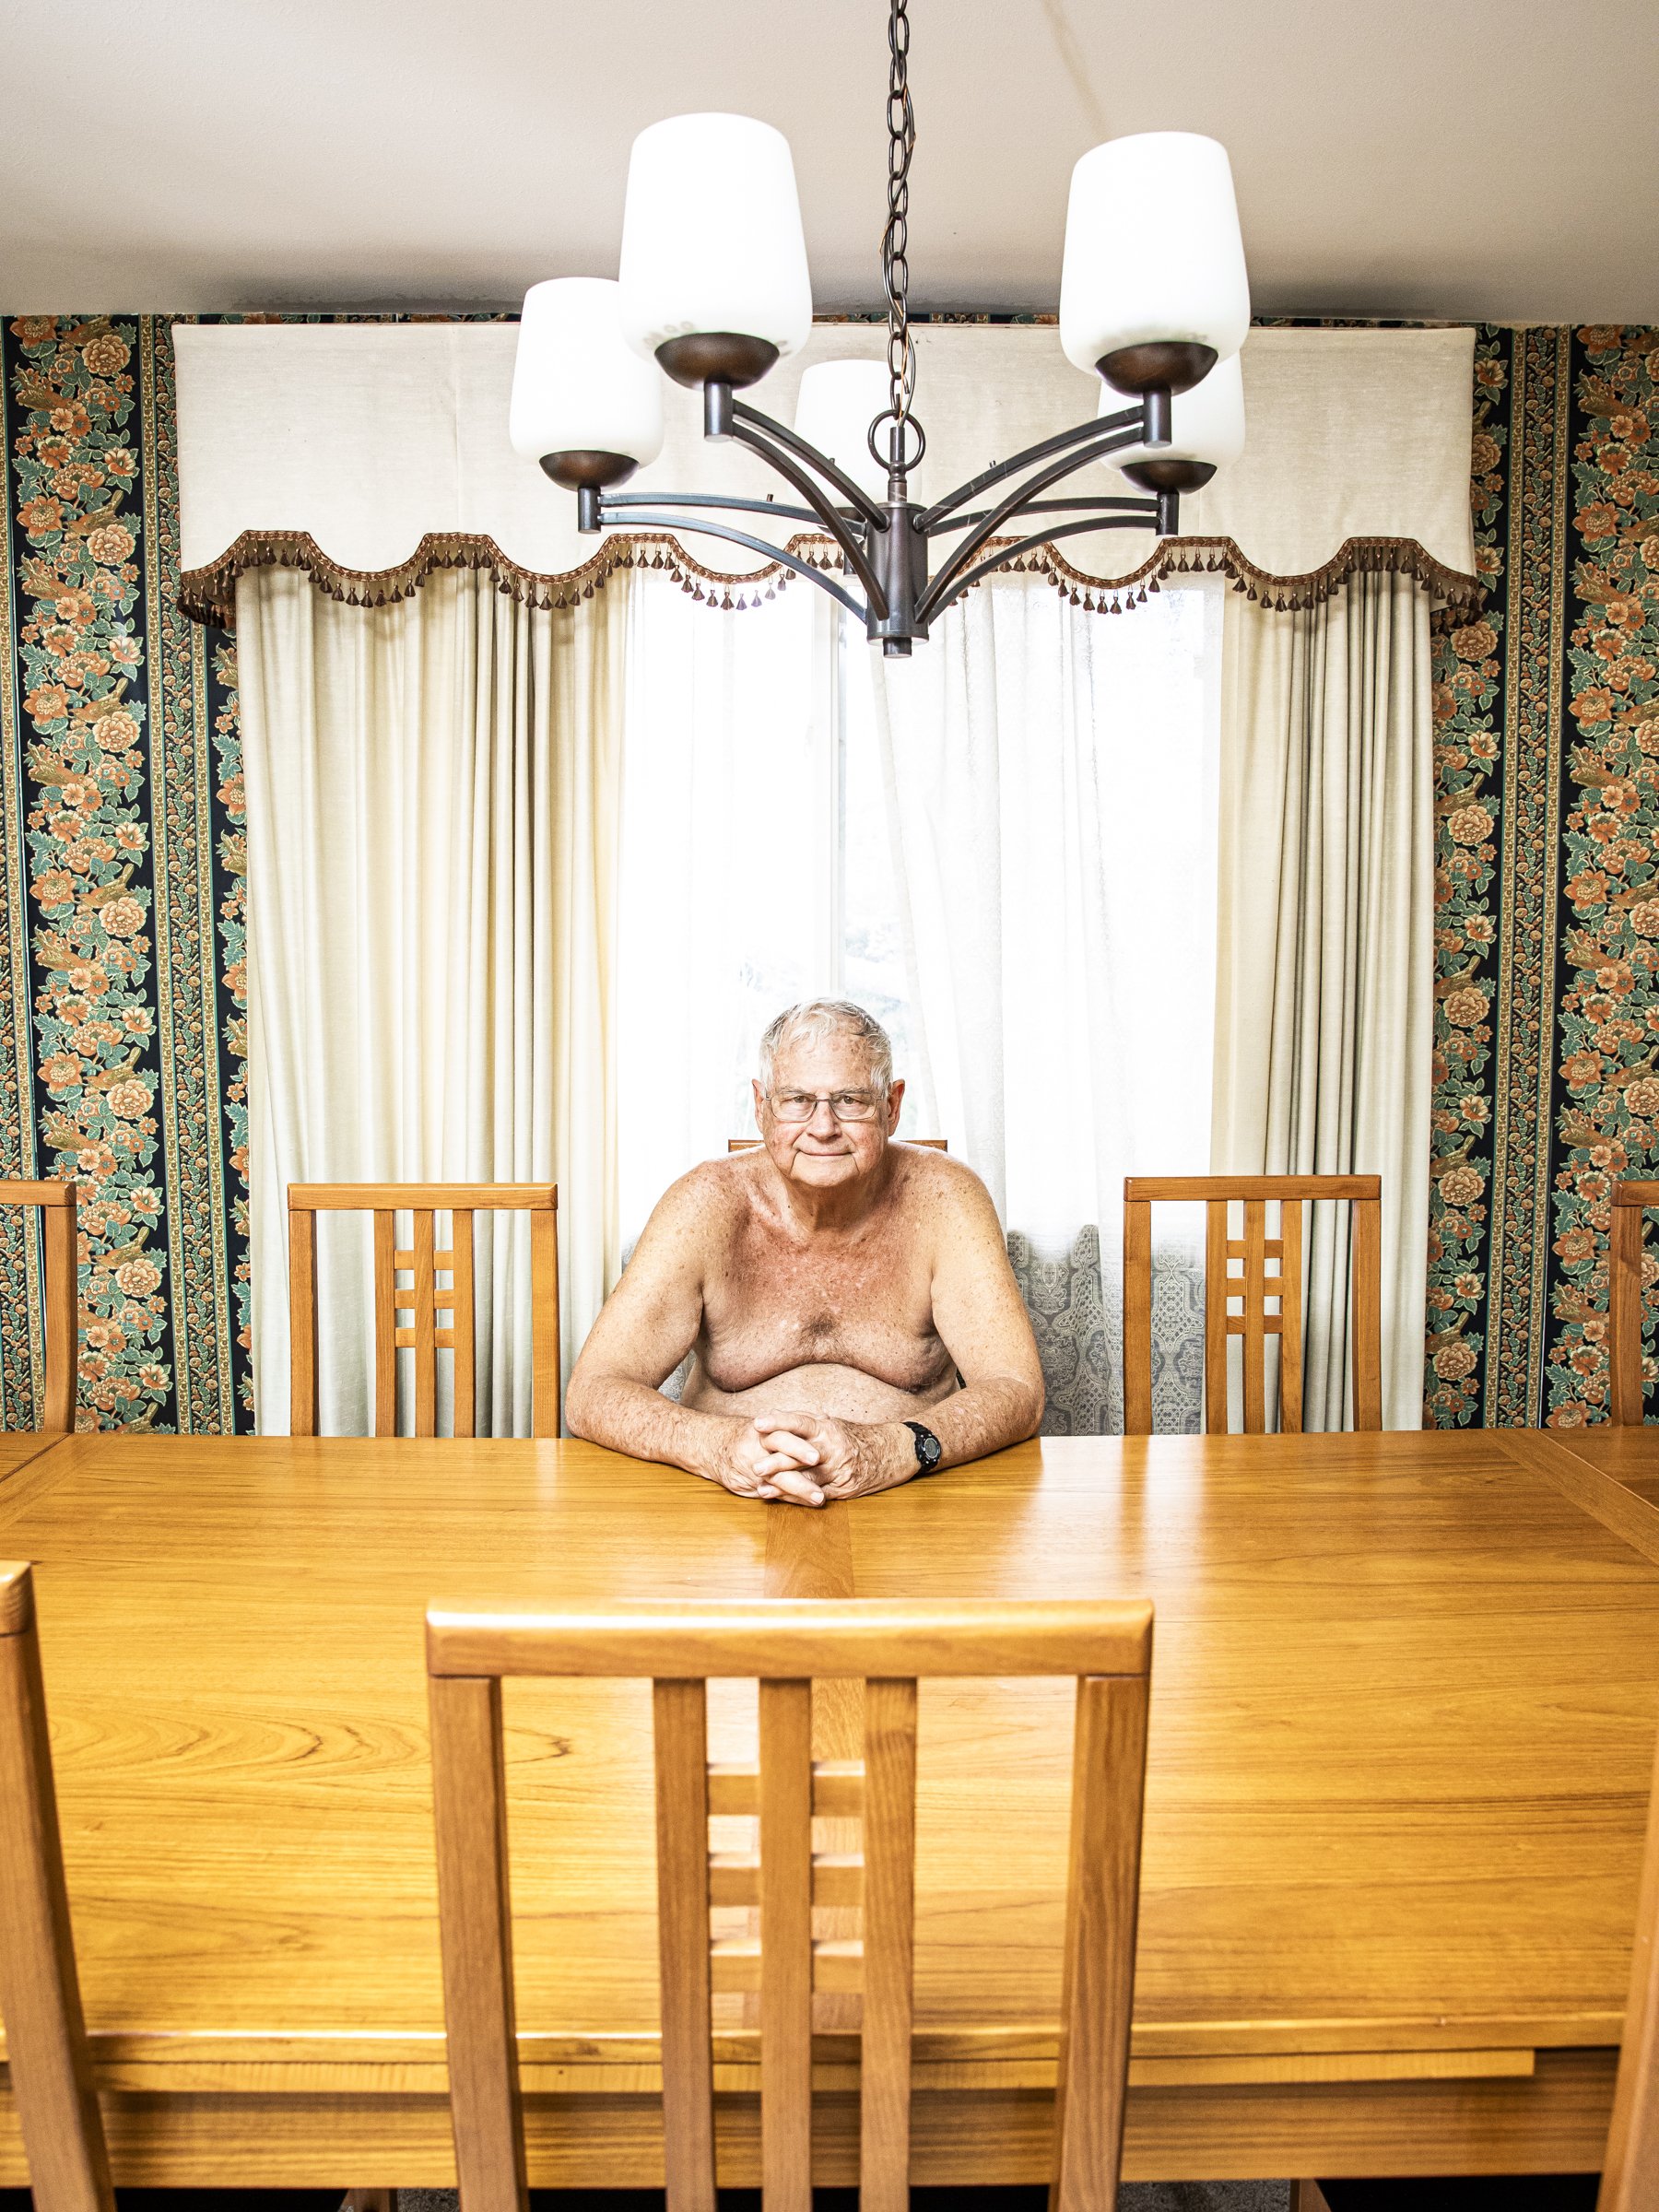  80-year-old nudist Dave Bufalo   for The Wall Street Journal 